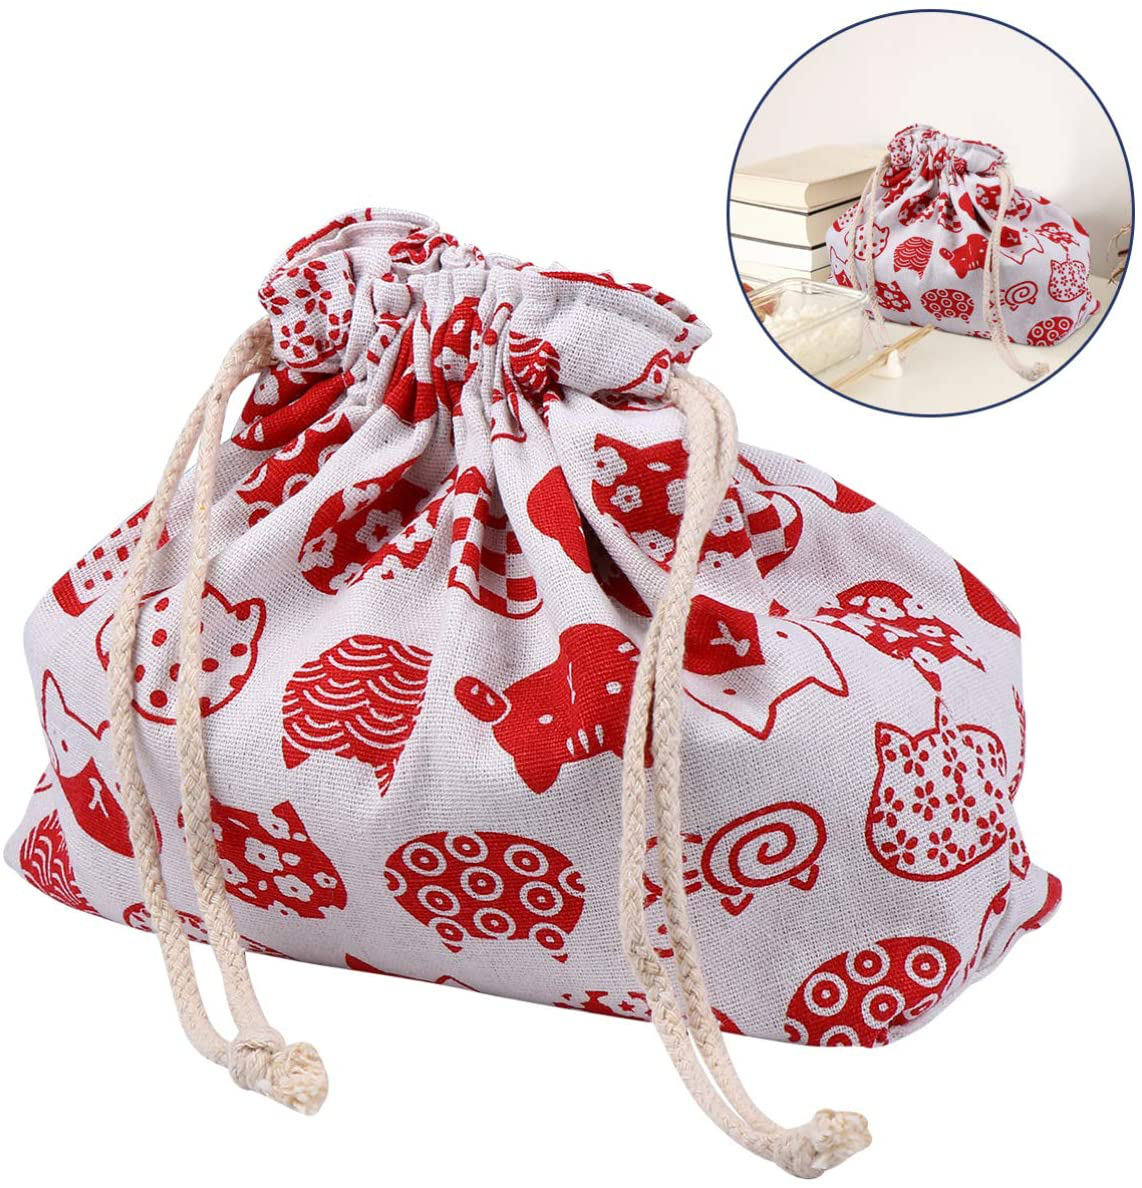 Toyvian Japanese Style Lunch Tote Bag Double Layers Cotton Linen Lunch Pouch Burlap Drawstring Storage Bag Box for Outdoor Activities Travel Business Office School Lunches Red